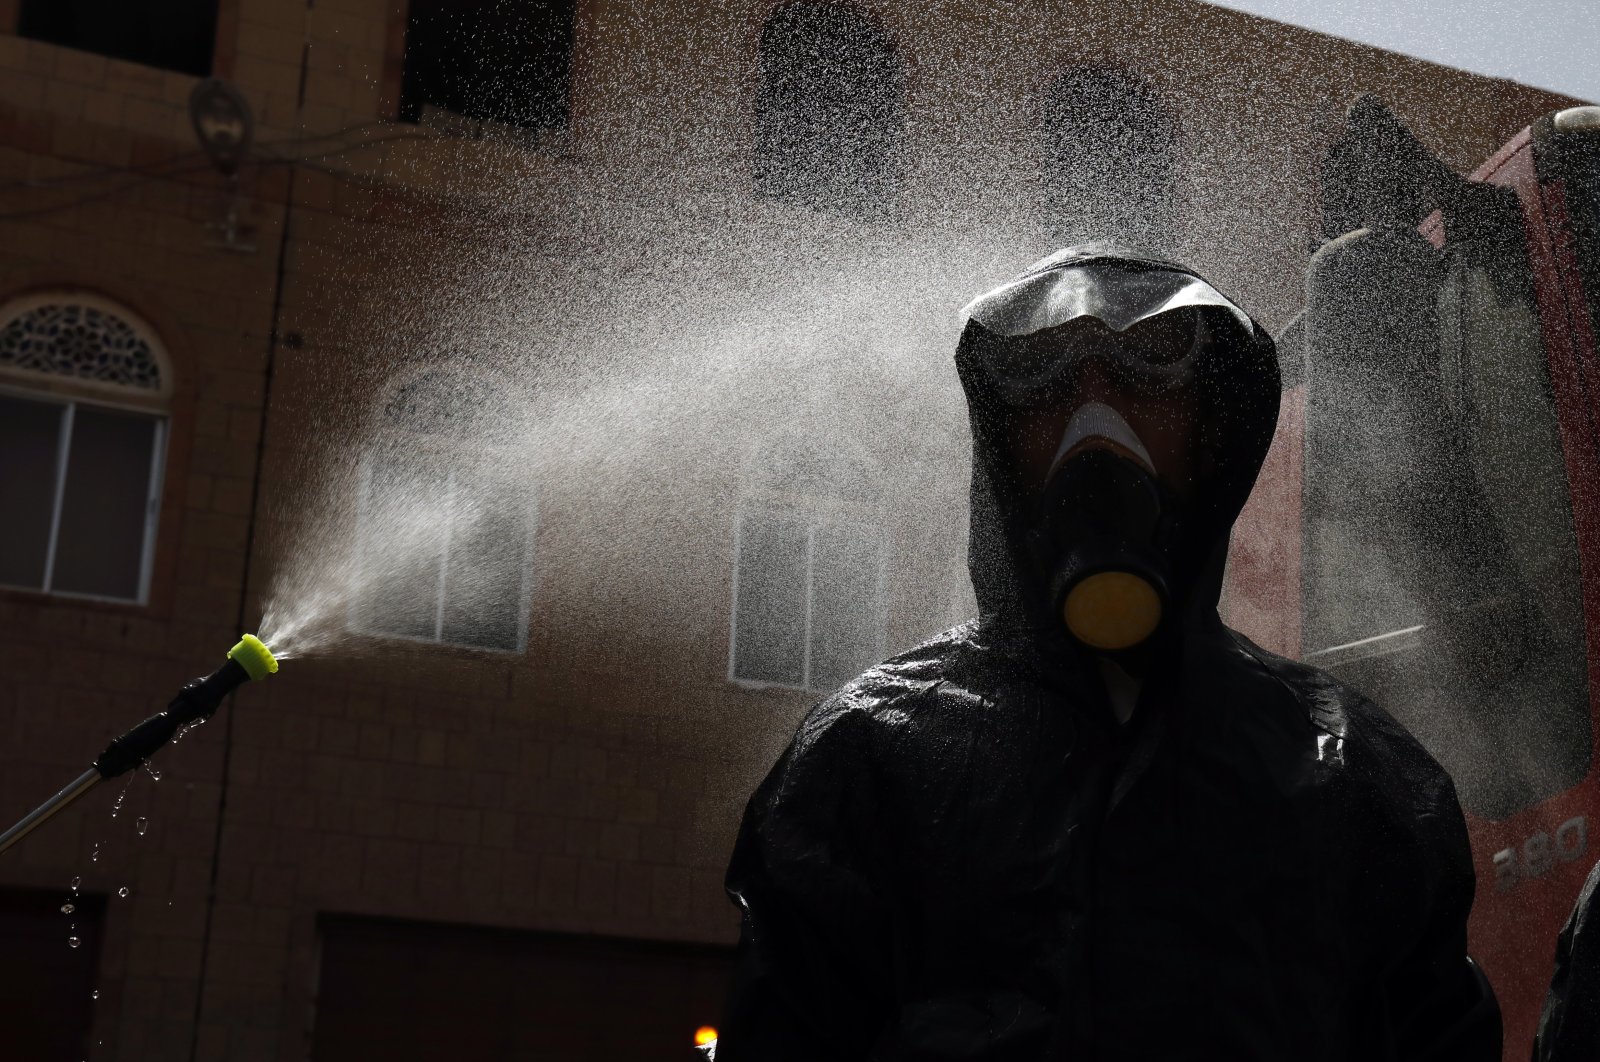 A staff of the Yemeni civil defense wearing protective gear, is decontaminated during a demonstration of an anti-proliferation training of the SARS-CoV-2 coronavirus, in Sanaa, Yemen, 12 April 2020. (EPA Photo)